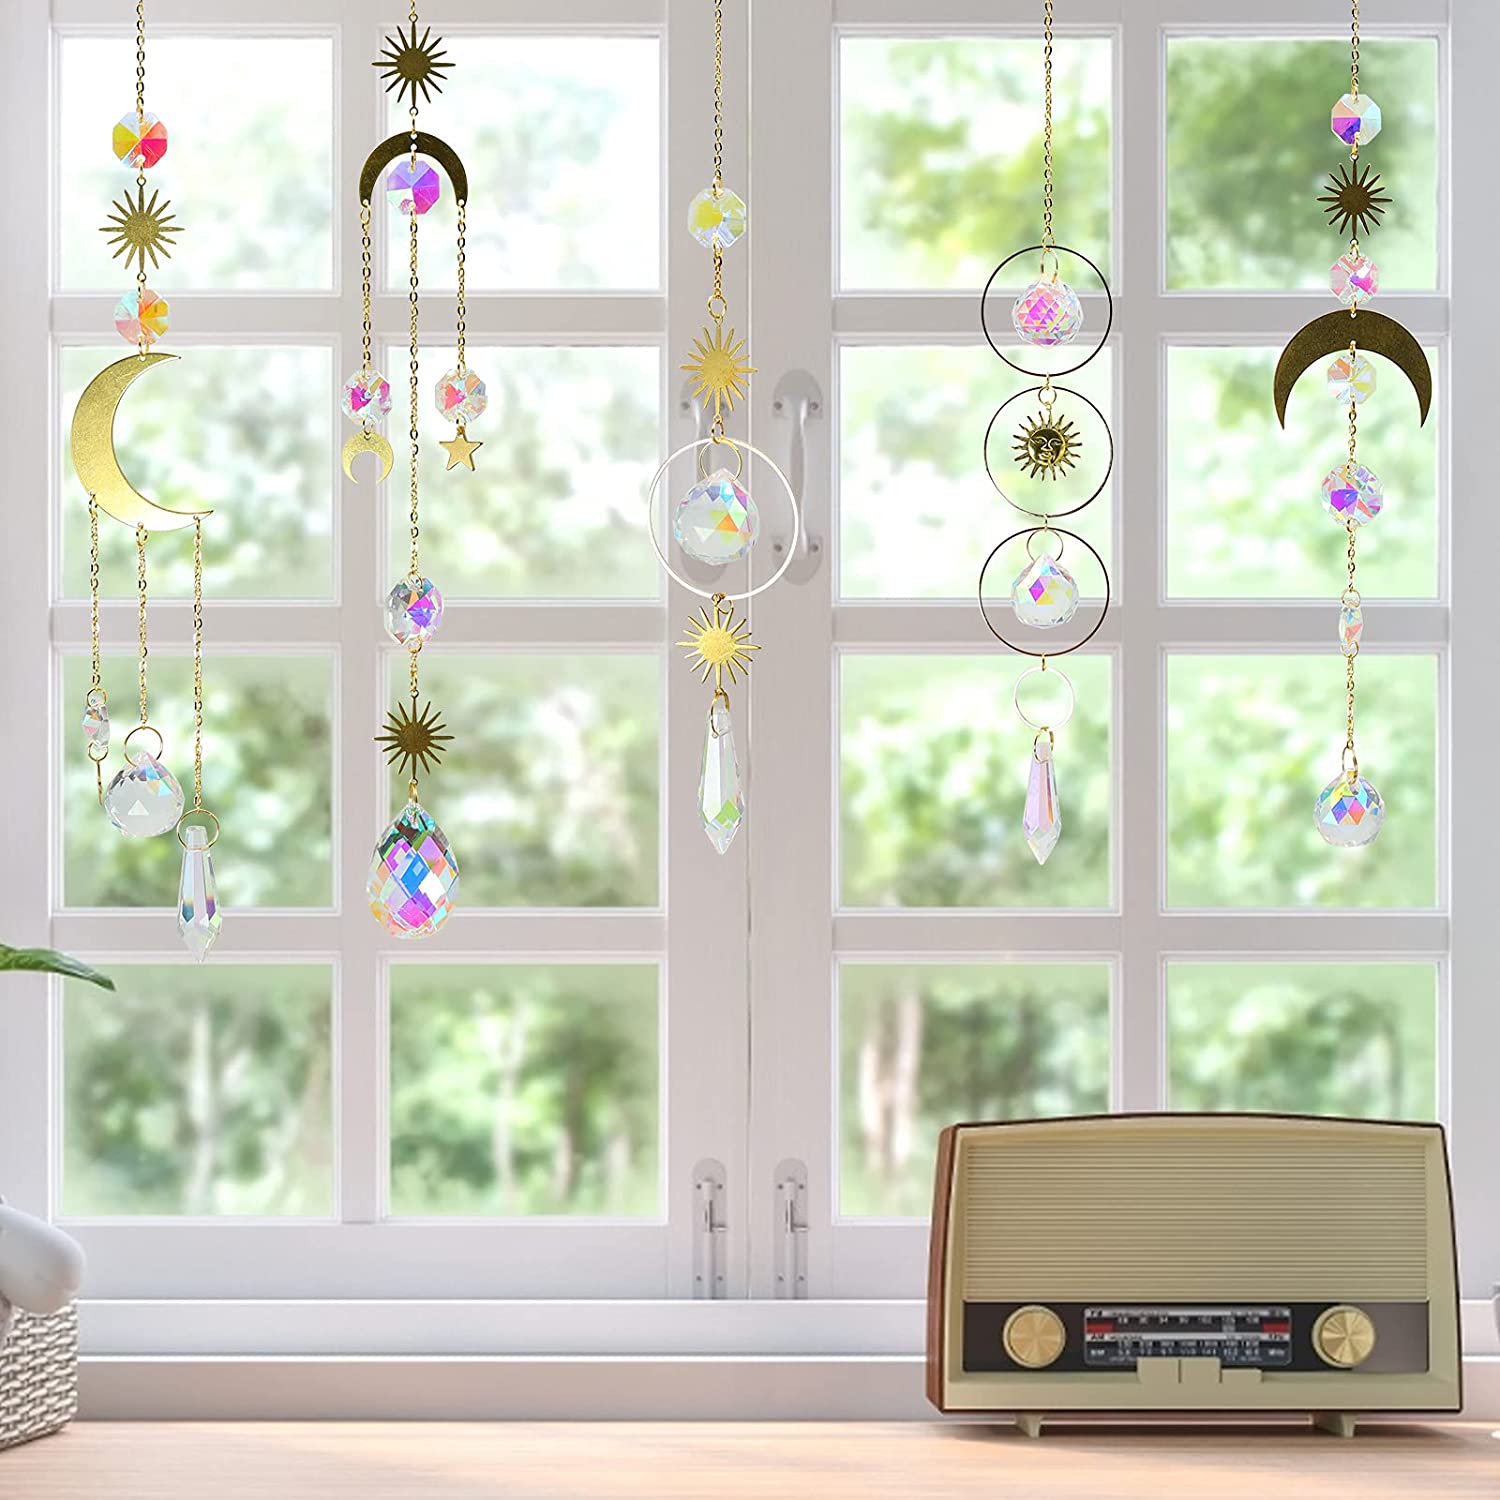 1 Piece Colorful Crystals Suncatcher Hanging Sun Catcher with Chain Pendant Ornament Crystal Balls for Window Home Garden Christmas Day Party Wedding Decoration - image 5 of 6